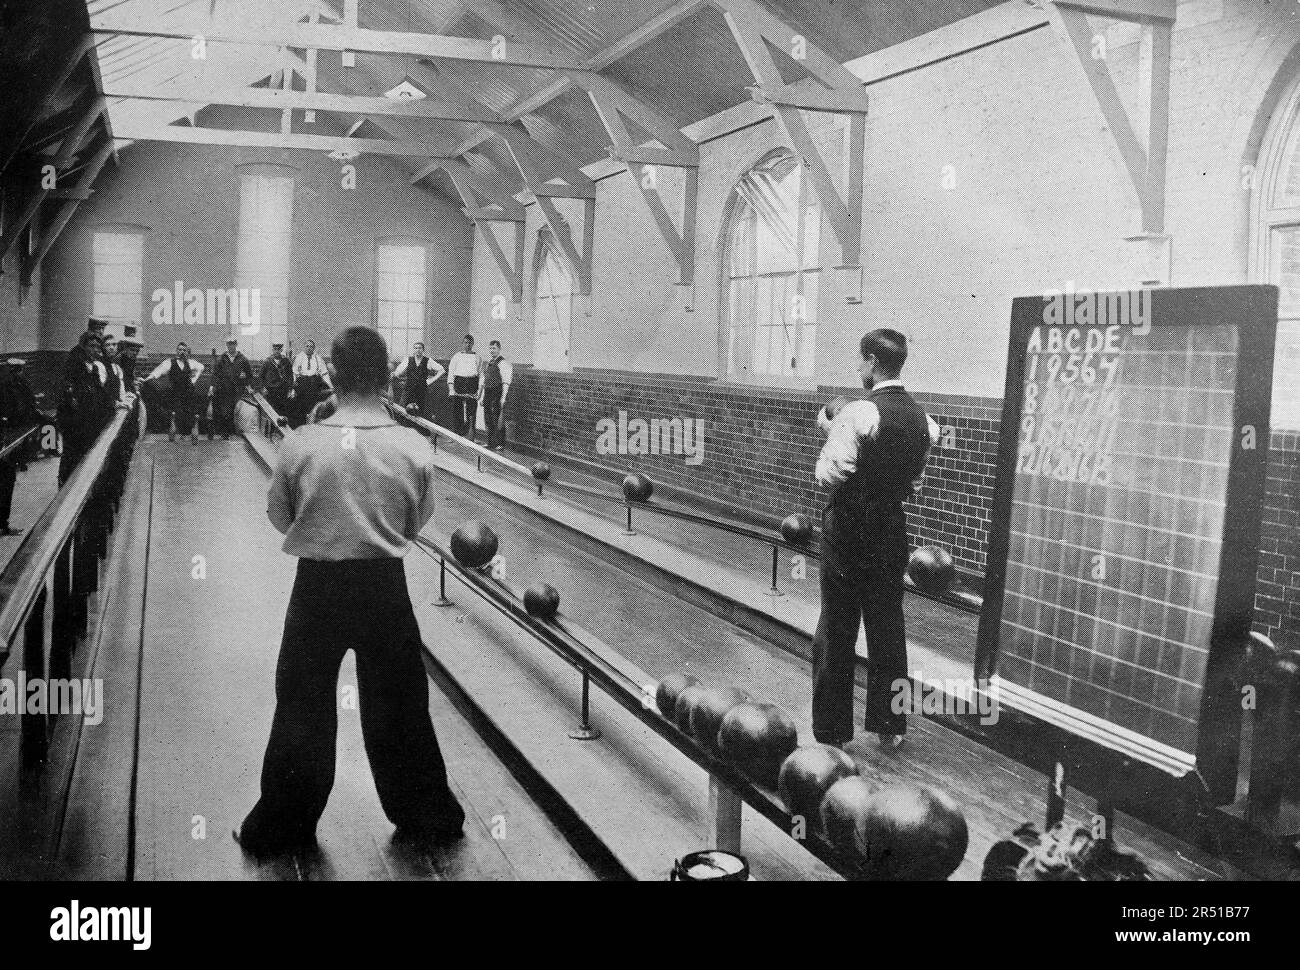 RN Barracks Chatham. Bowling Alley: Recreational area in use by various ...